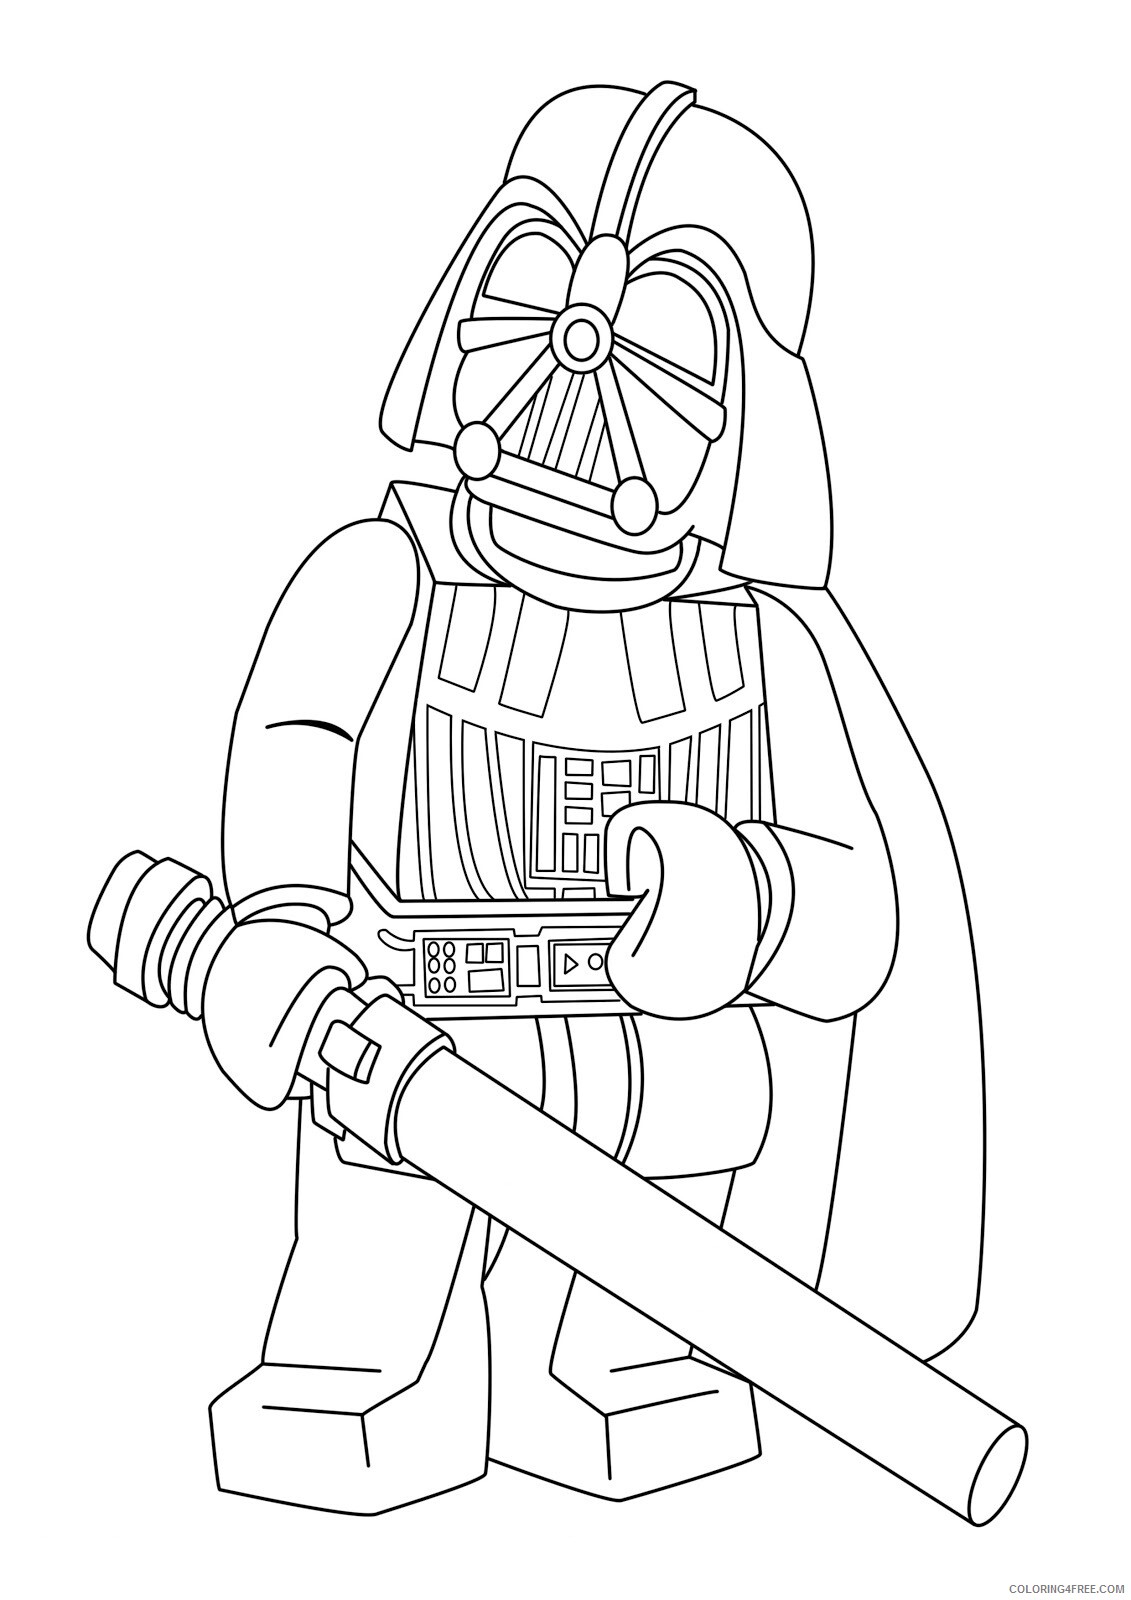 Star Wars Coloring Pages TV Film Lego Star Wars 2 Printable 2020 07801 Coloring4free